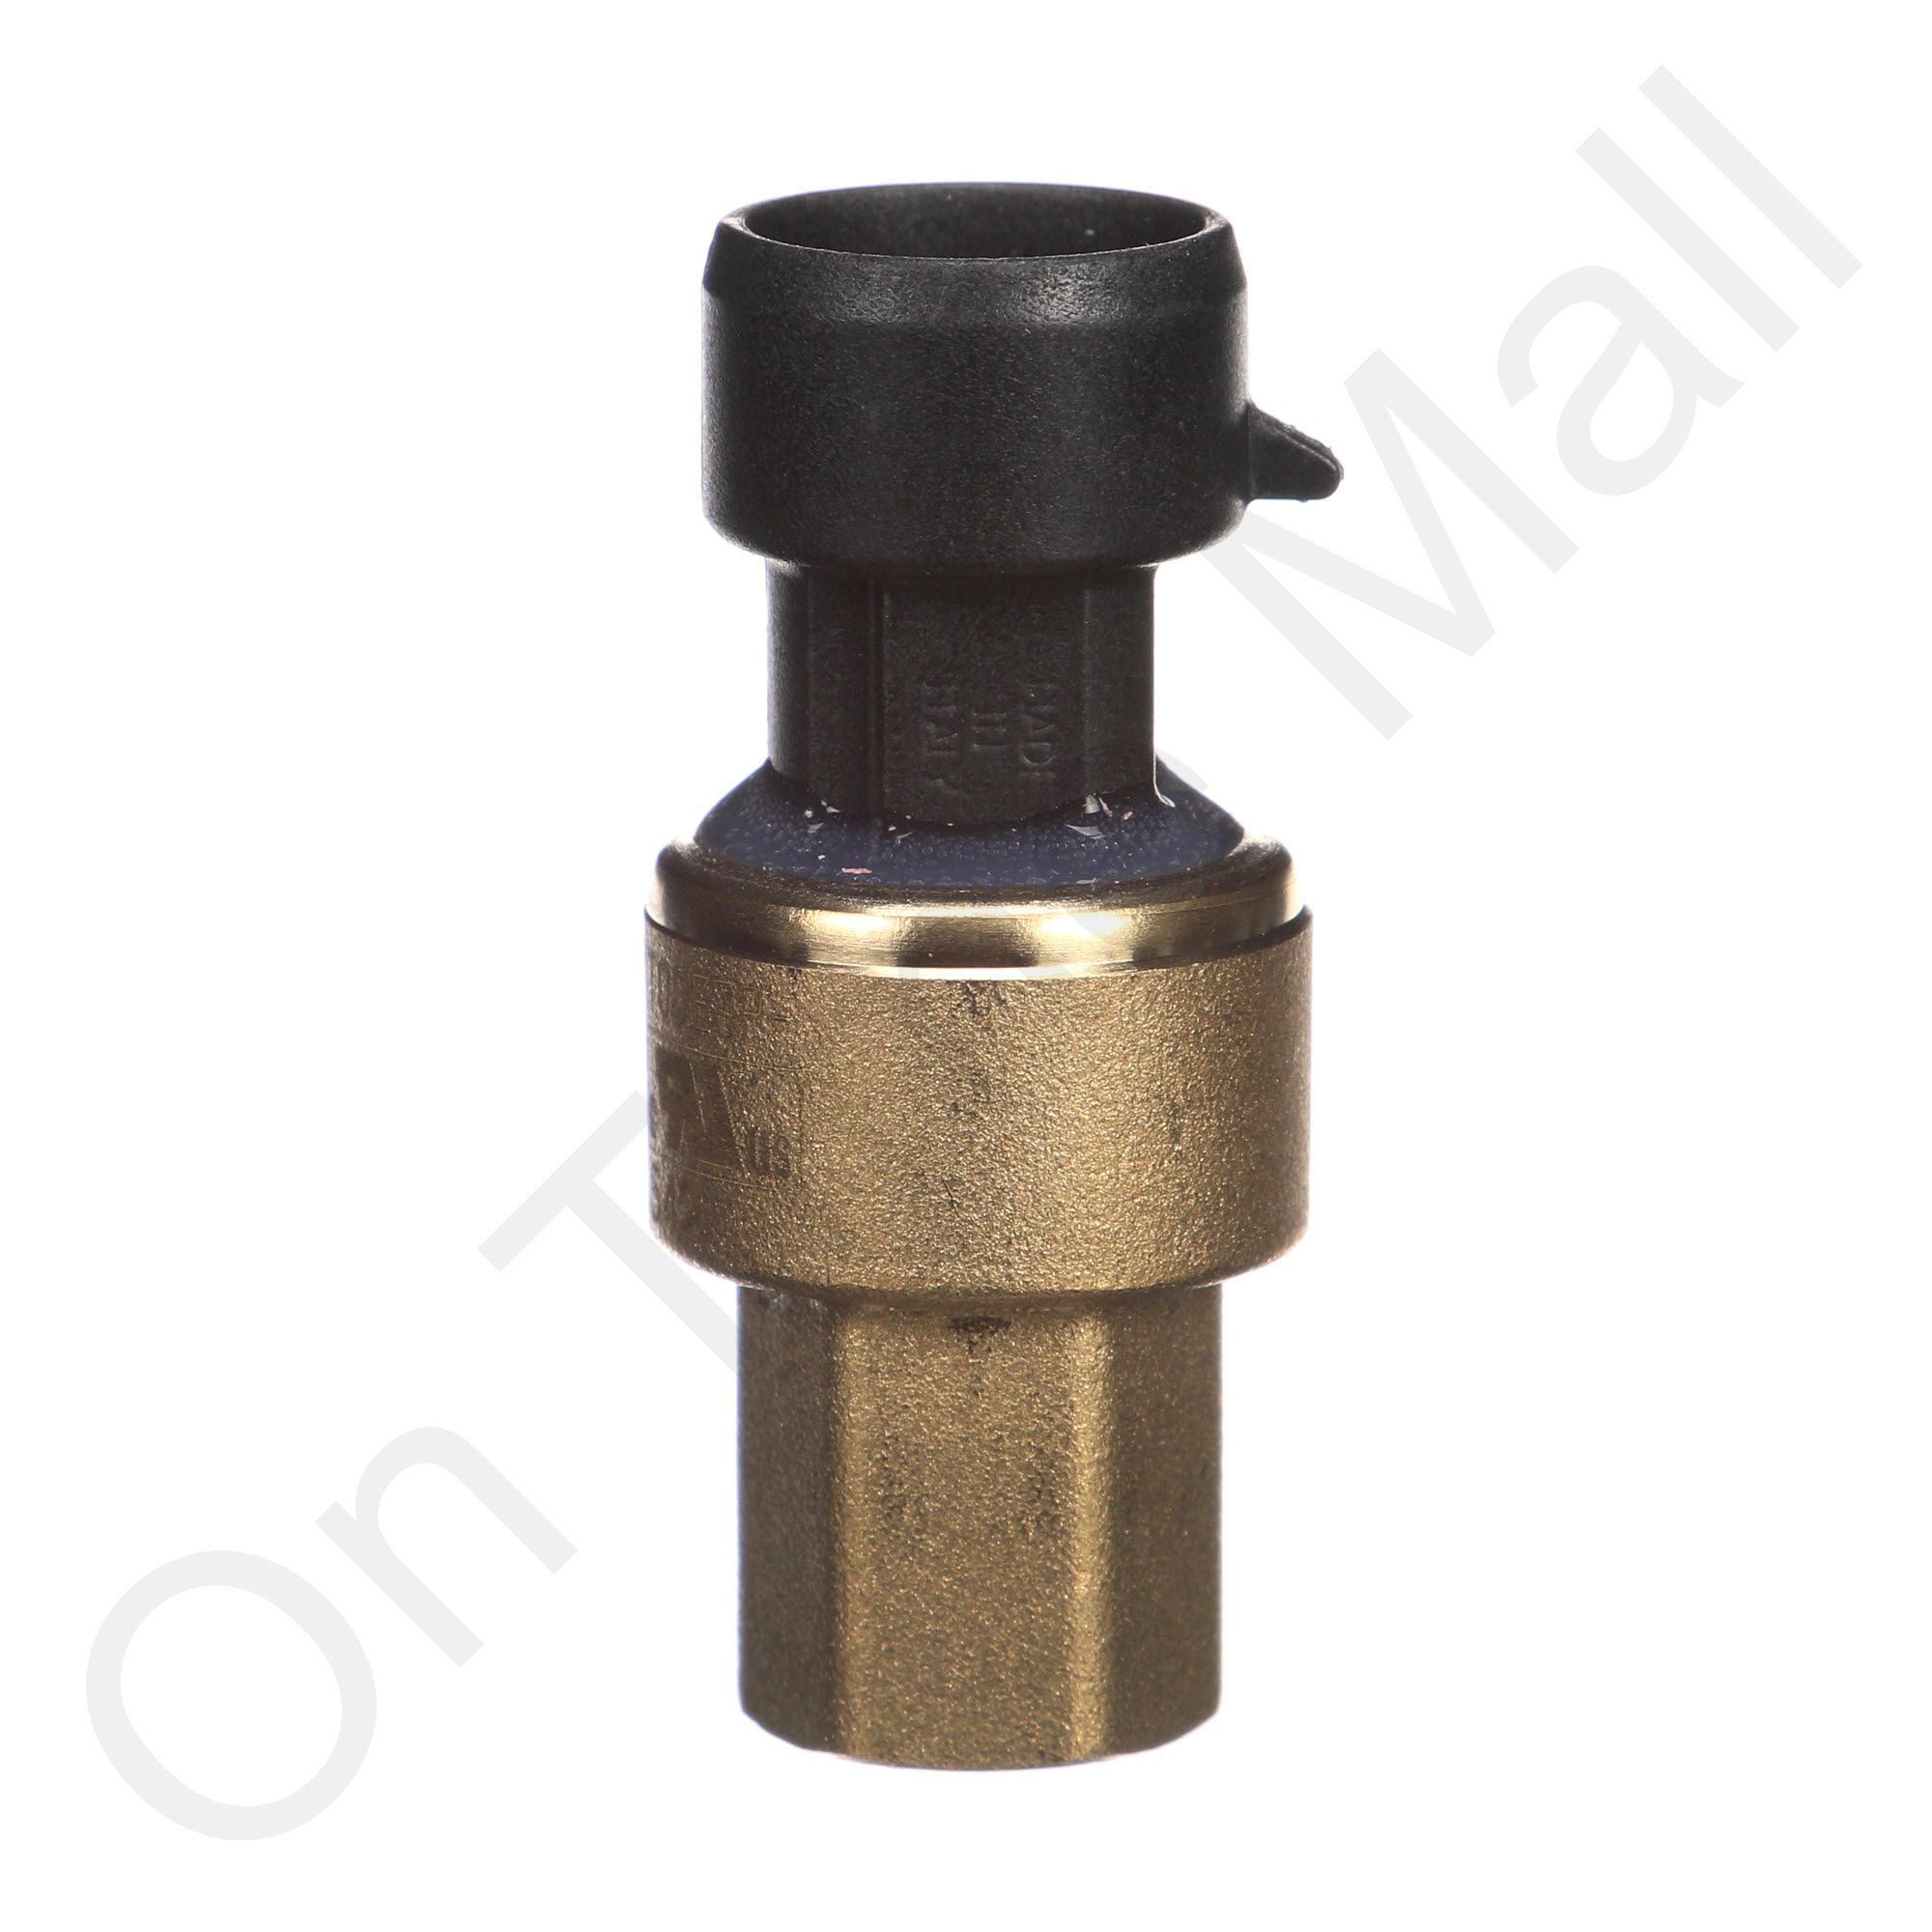 Bosch Pressure Washer Lance Adapter Coupling Connector to 1/4" Male BSP Screw 